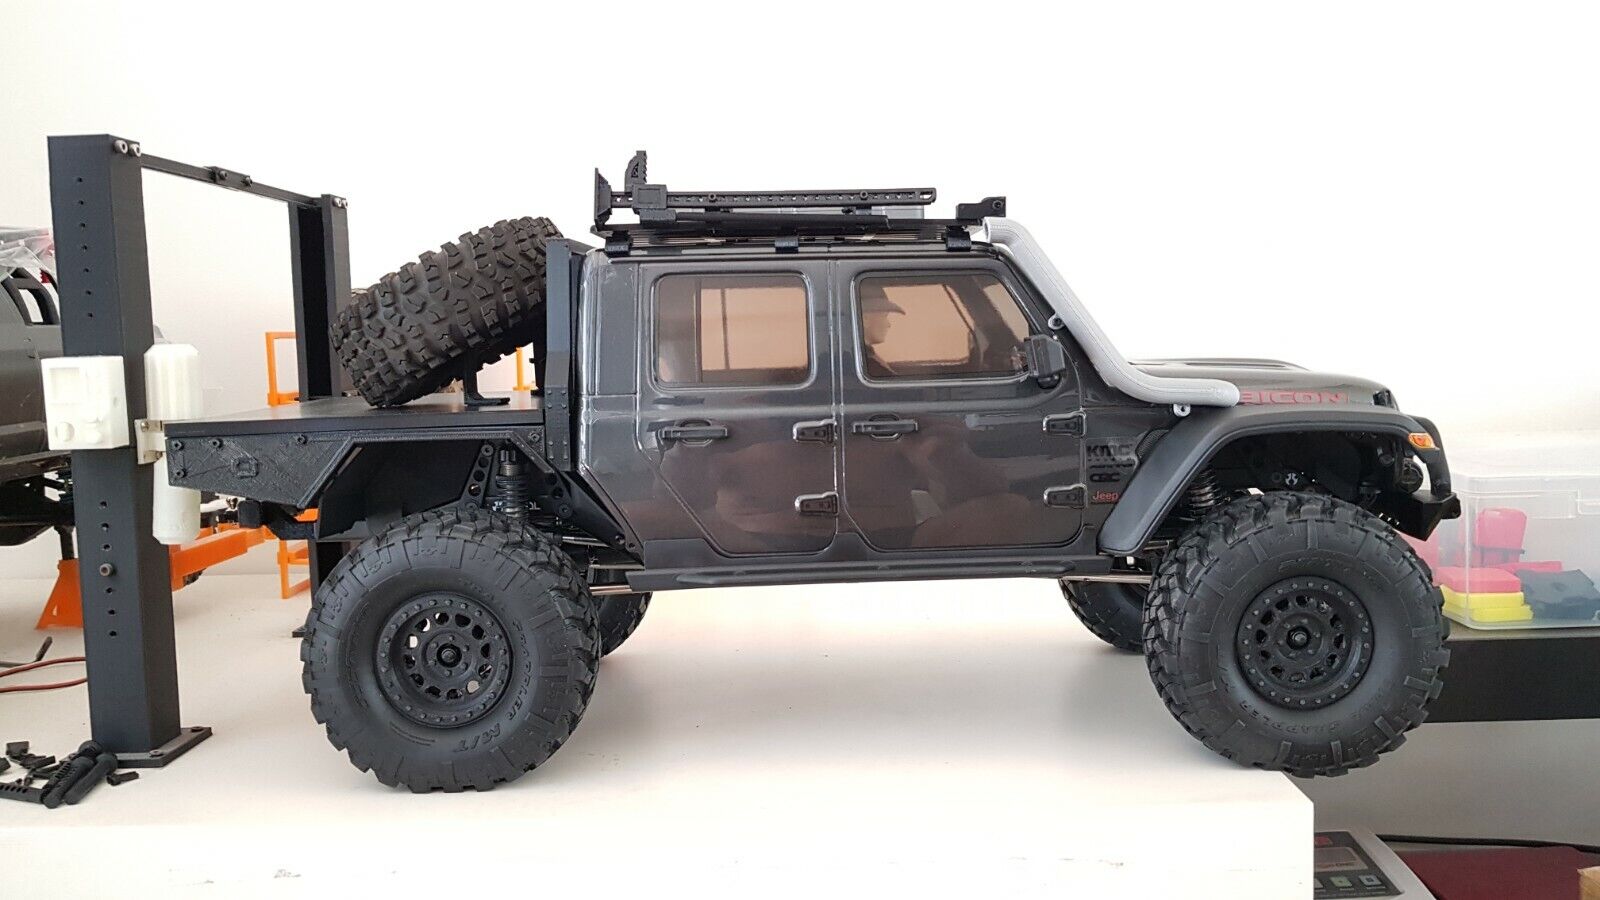 Upgrade for Axial scx10 iii Flatbed tray jeep gladiator JT wrangler RC |  eBay